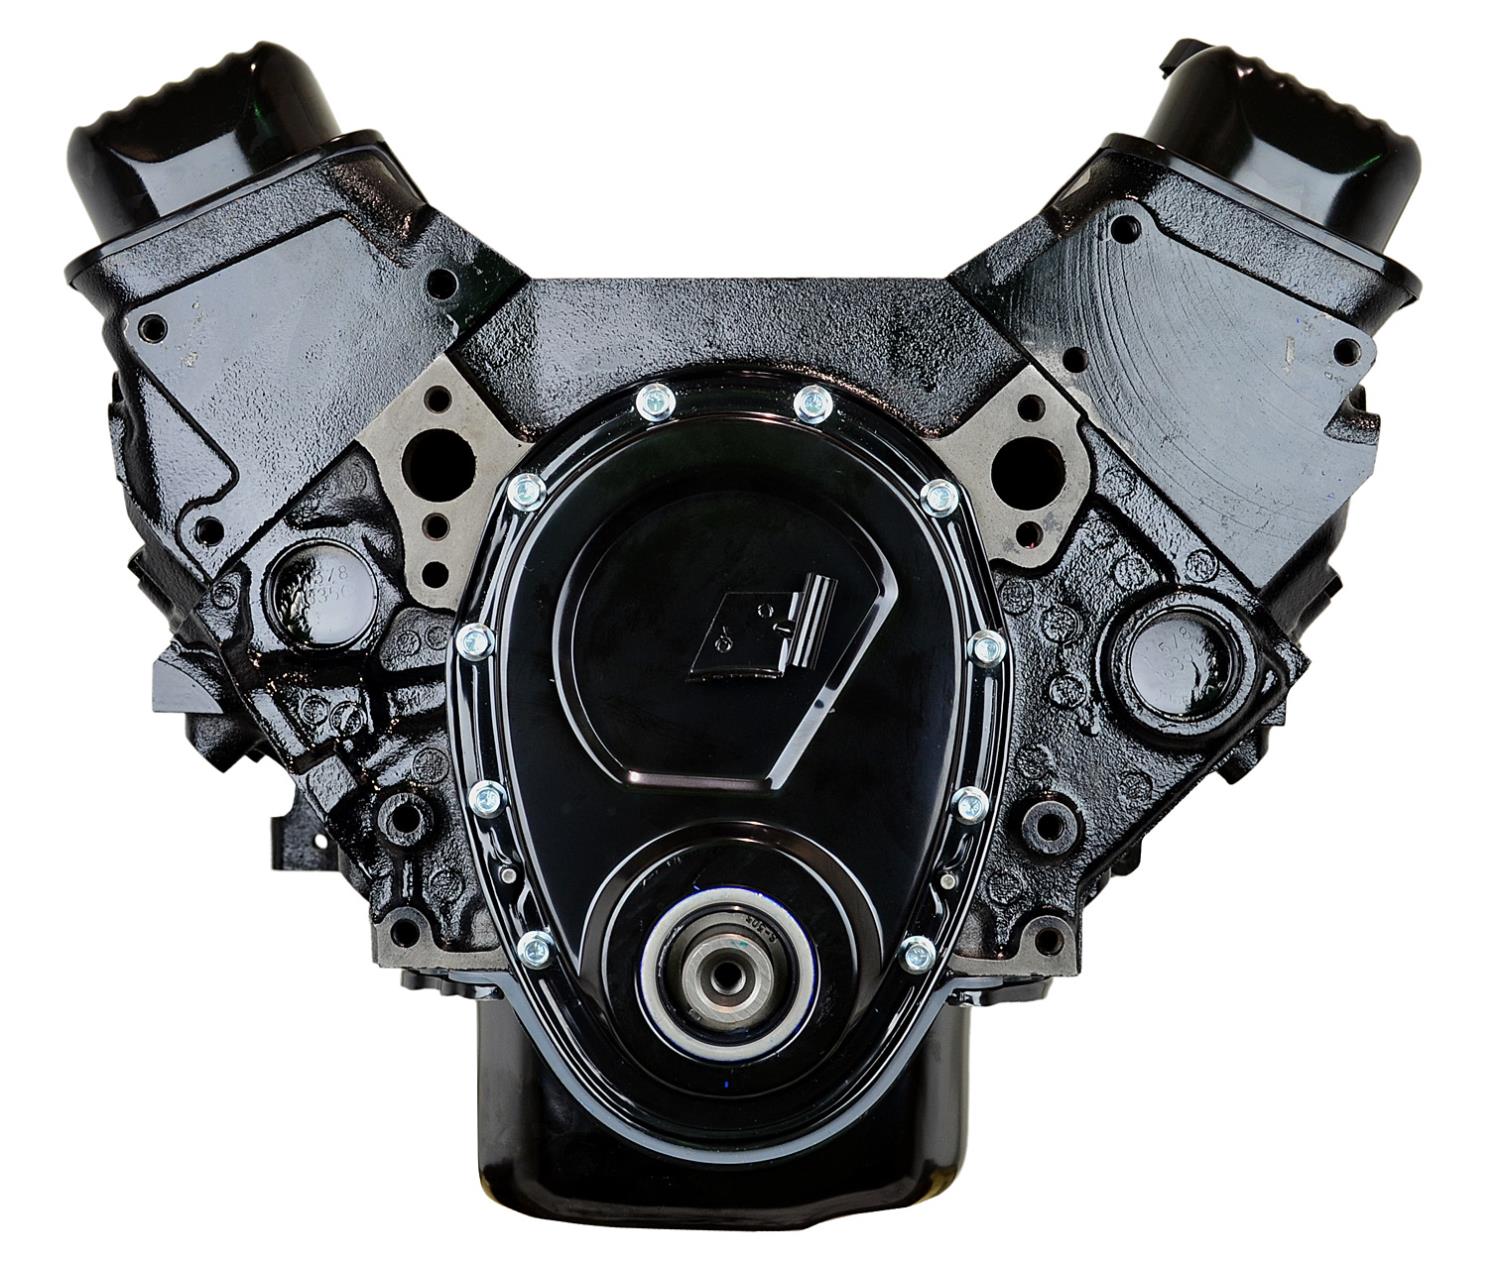 VC99 Remanufactured Crate Engine for 1987-1991 GM C/K Truck, Astro, G/P Van with 4.3L V6